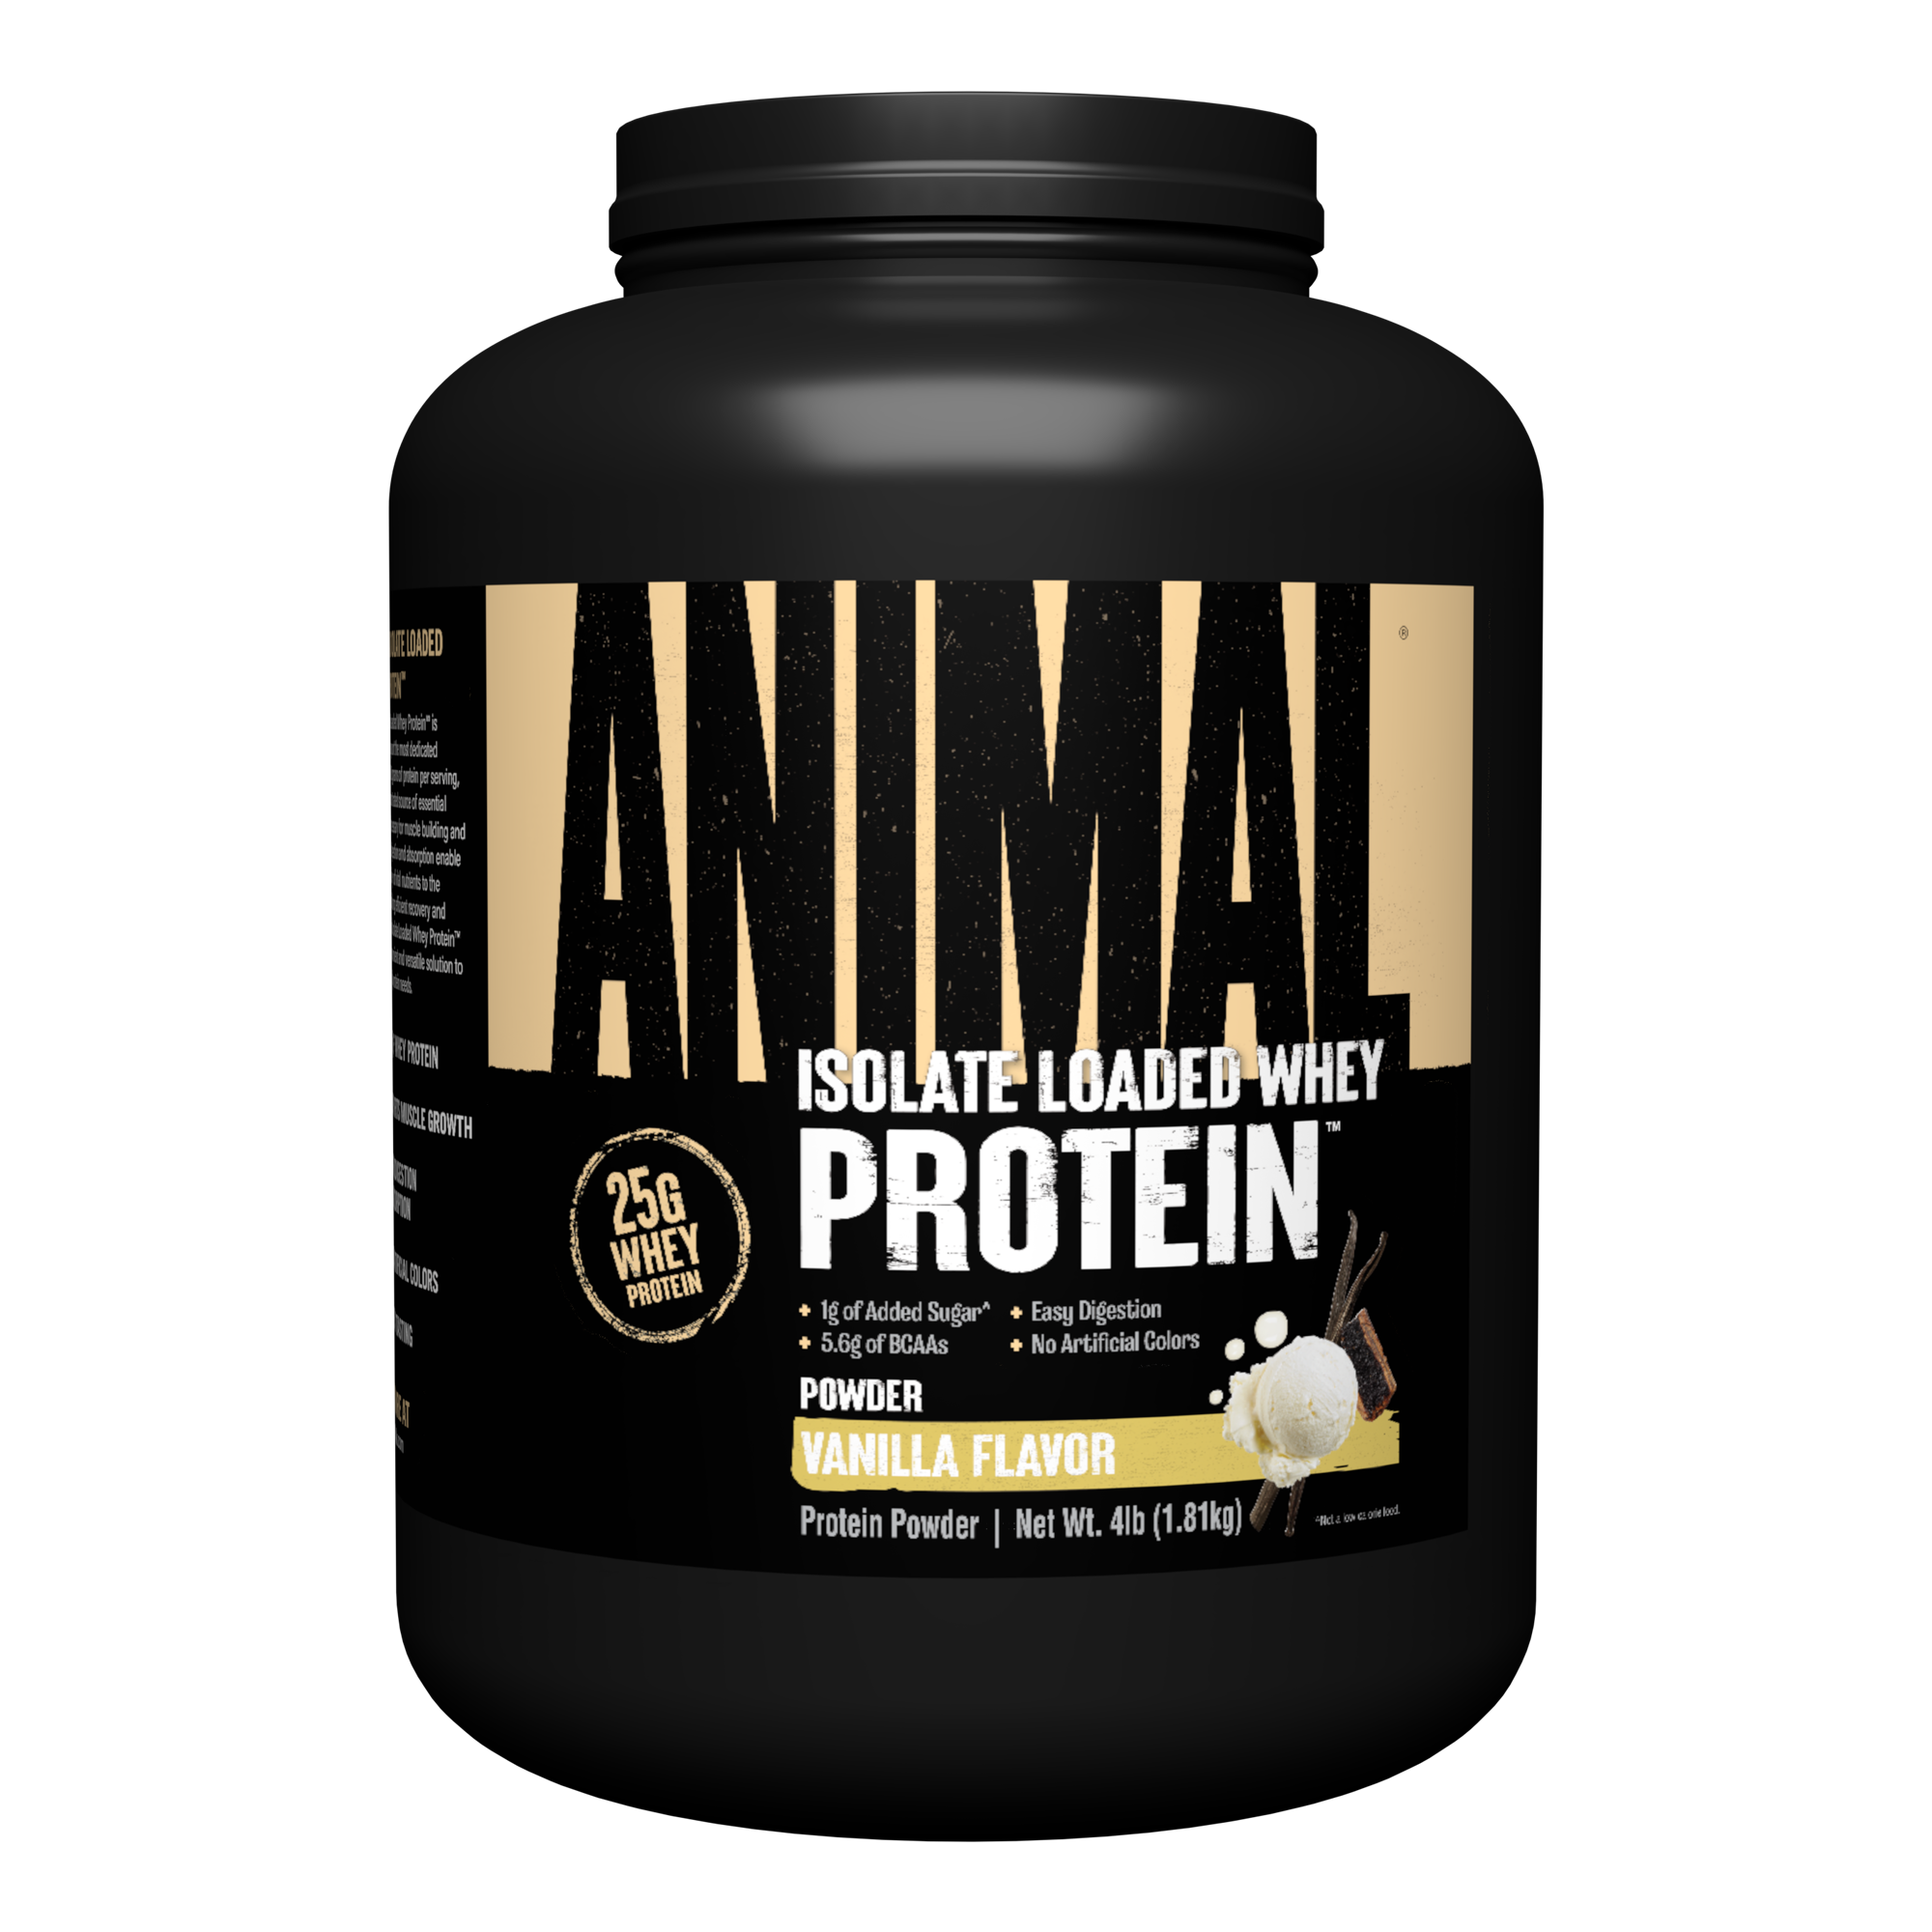 Animal Whey Protein - A1 Supplements Store